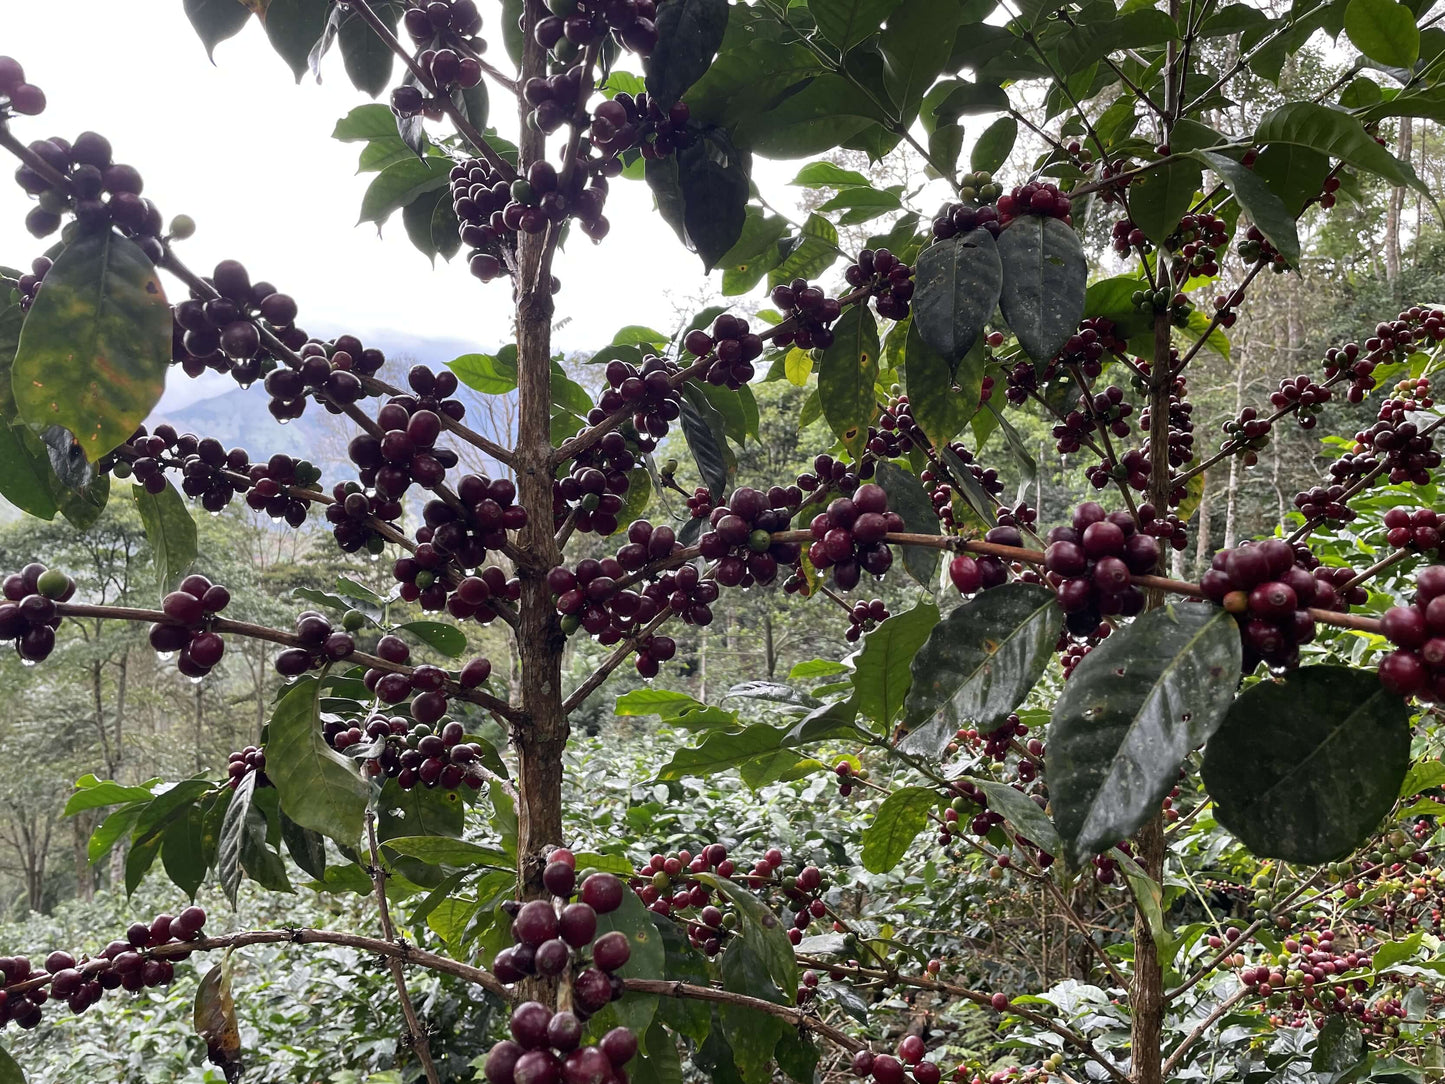 The coffee beans growing on the farm in Peru the "Peru, Richard Rubio" by Lost Sheep Coffee